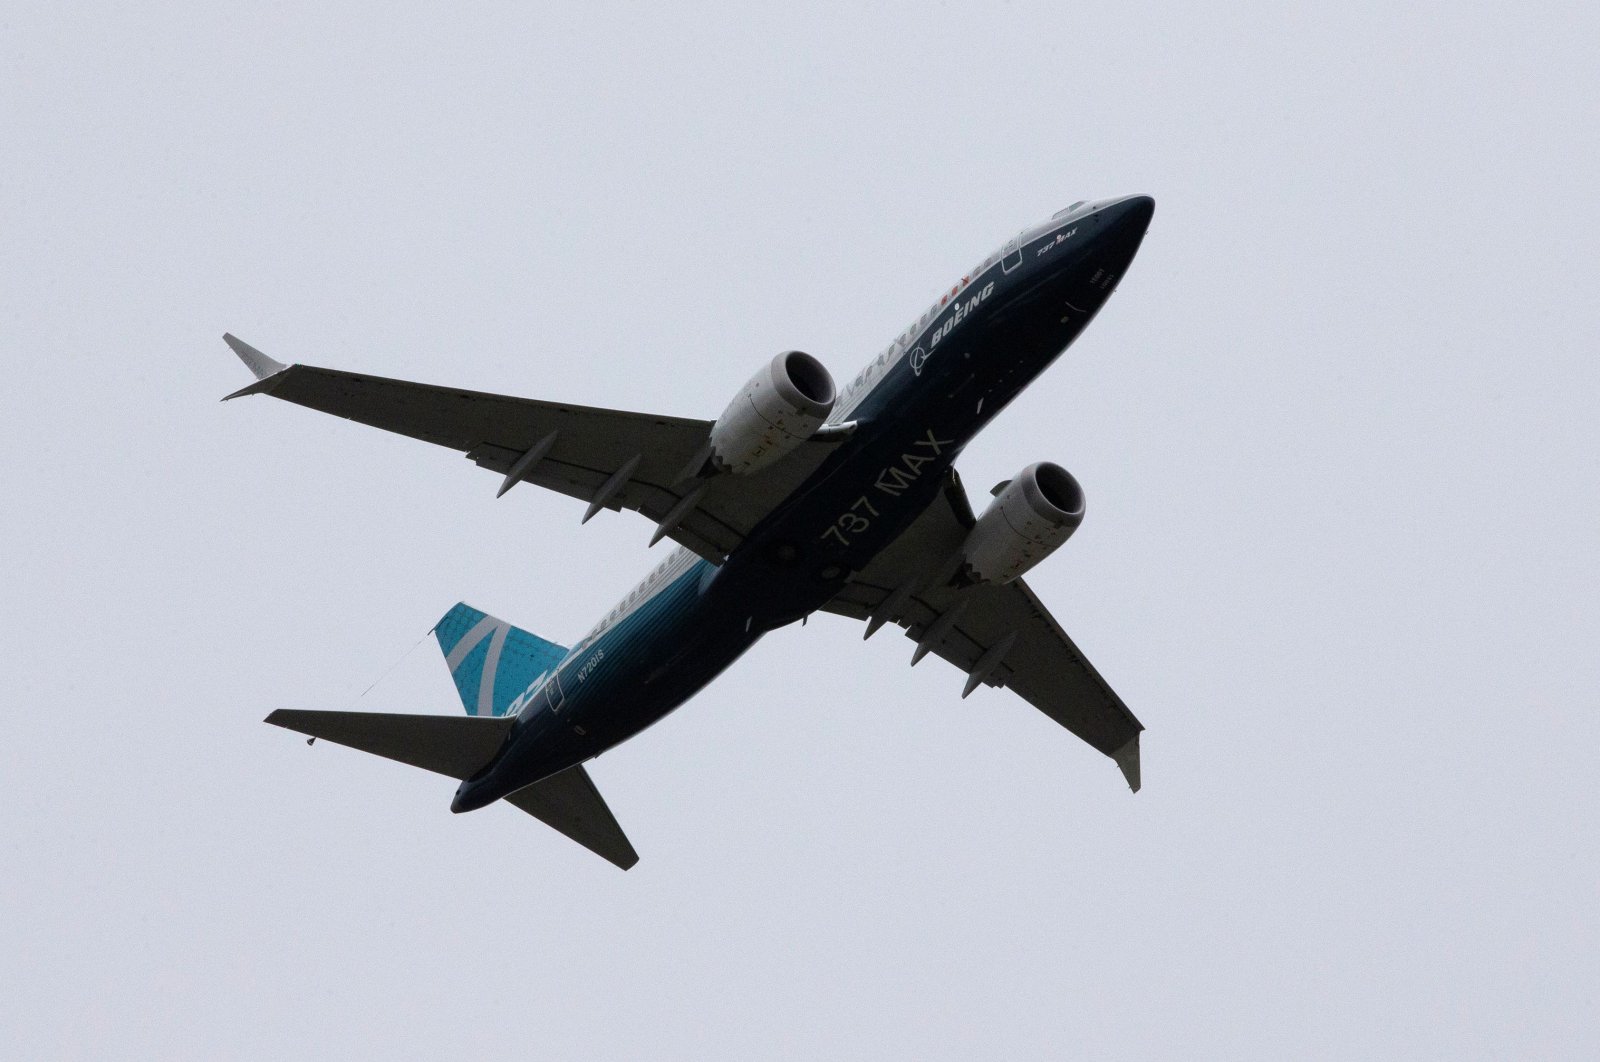 A Boeing 737 MAX airplane takes off on a test flight from Boeing Field in Seattle, Washington, U.S. June 29, 2020. (Reuters Photo)